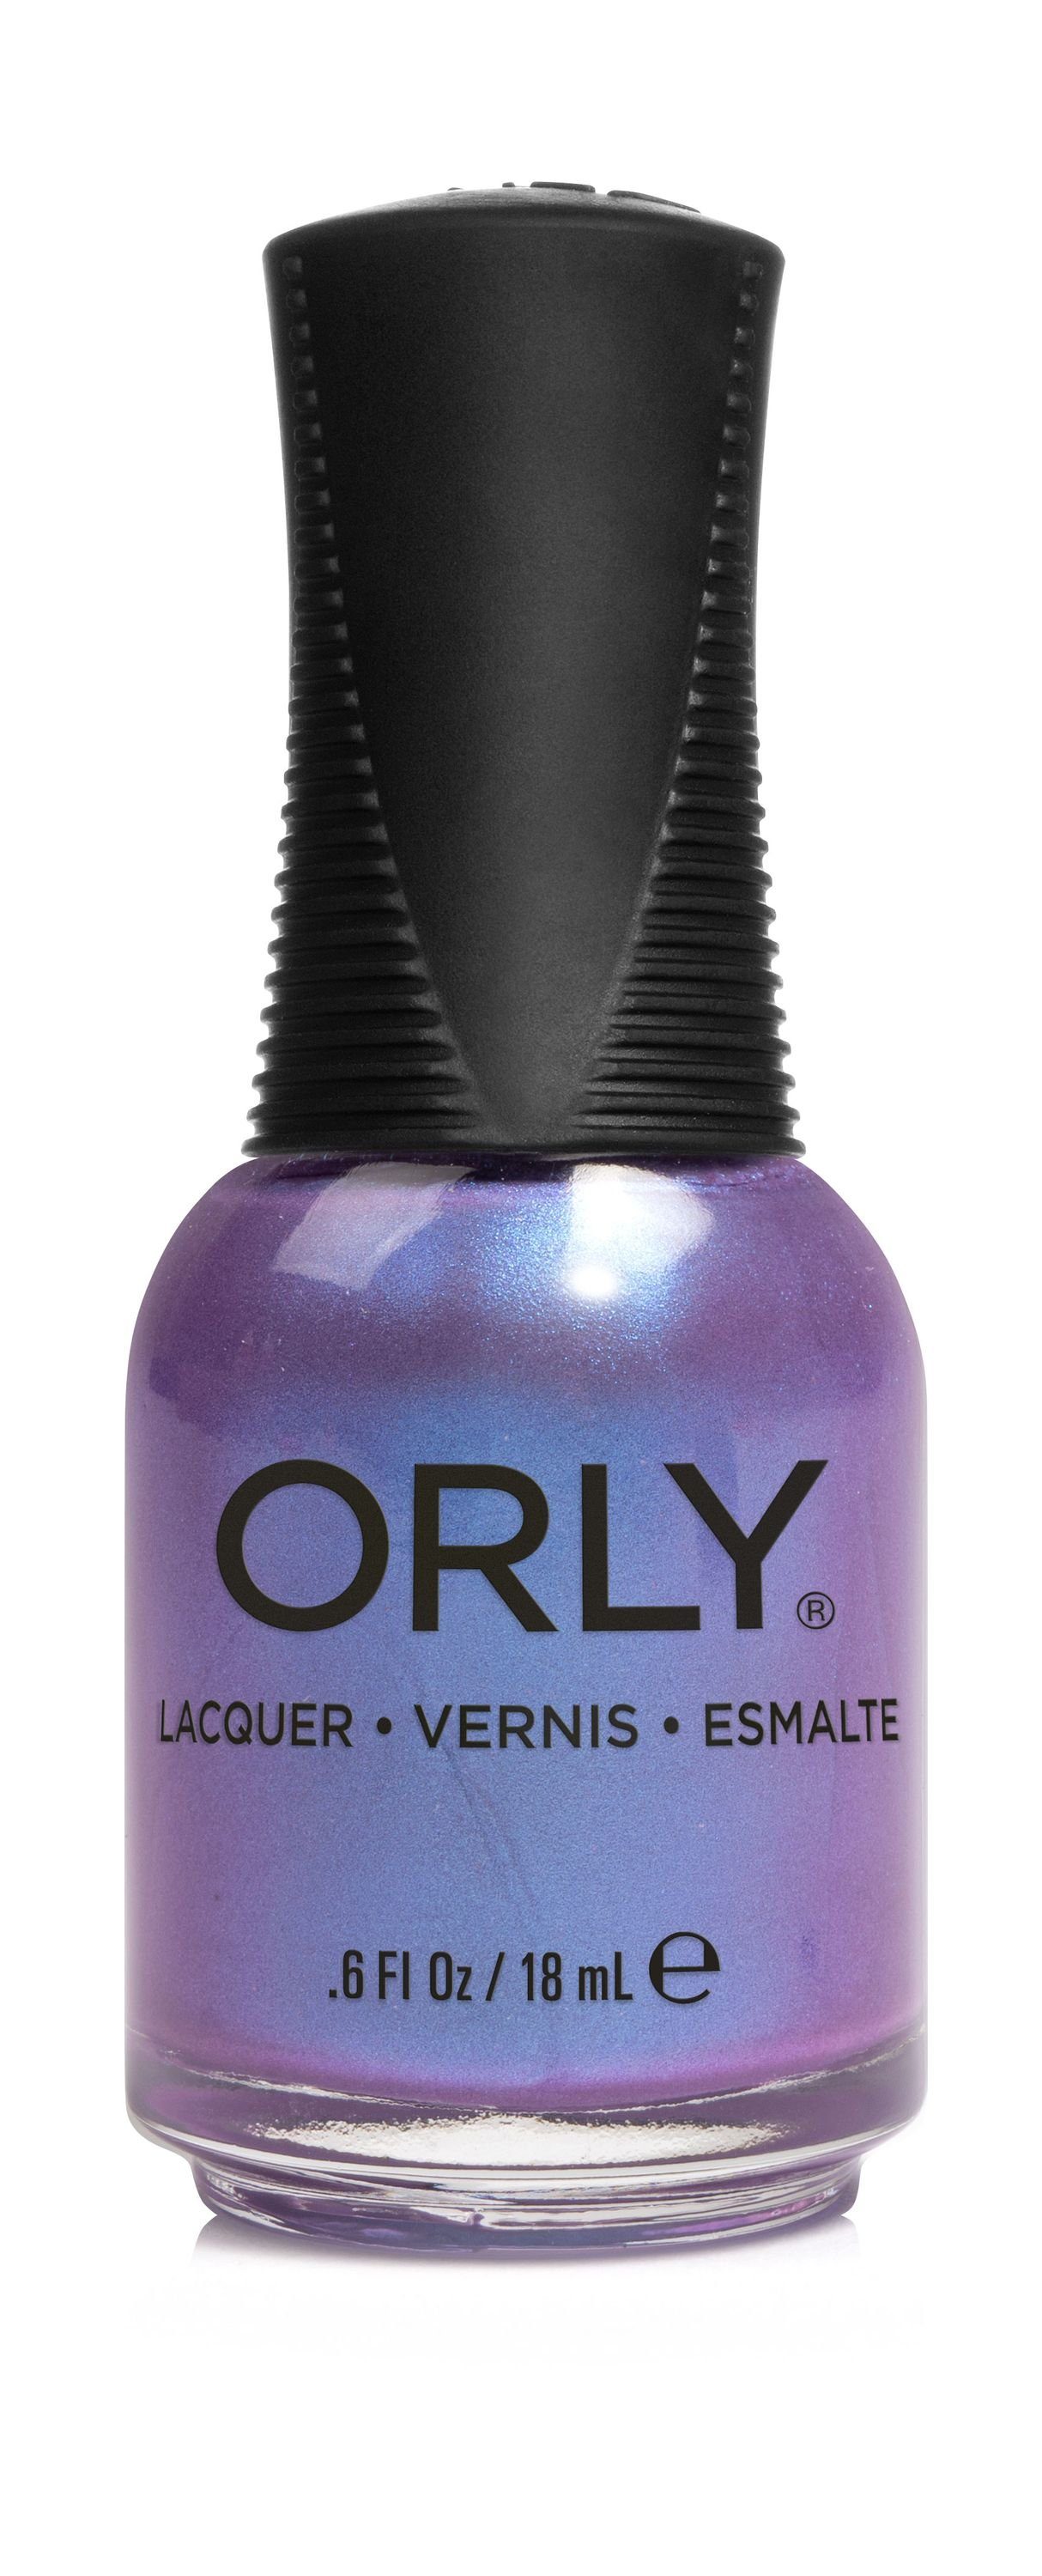 ORLY Nagellack Opposites Attract Nagellack